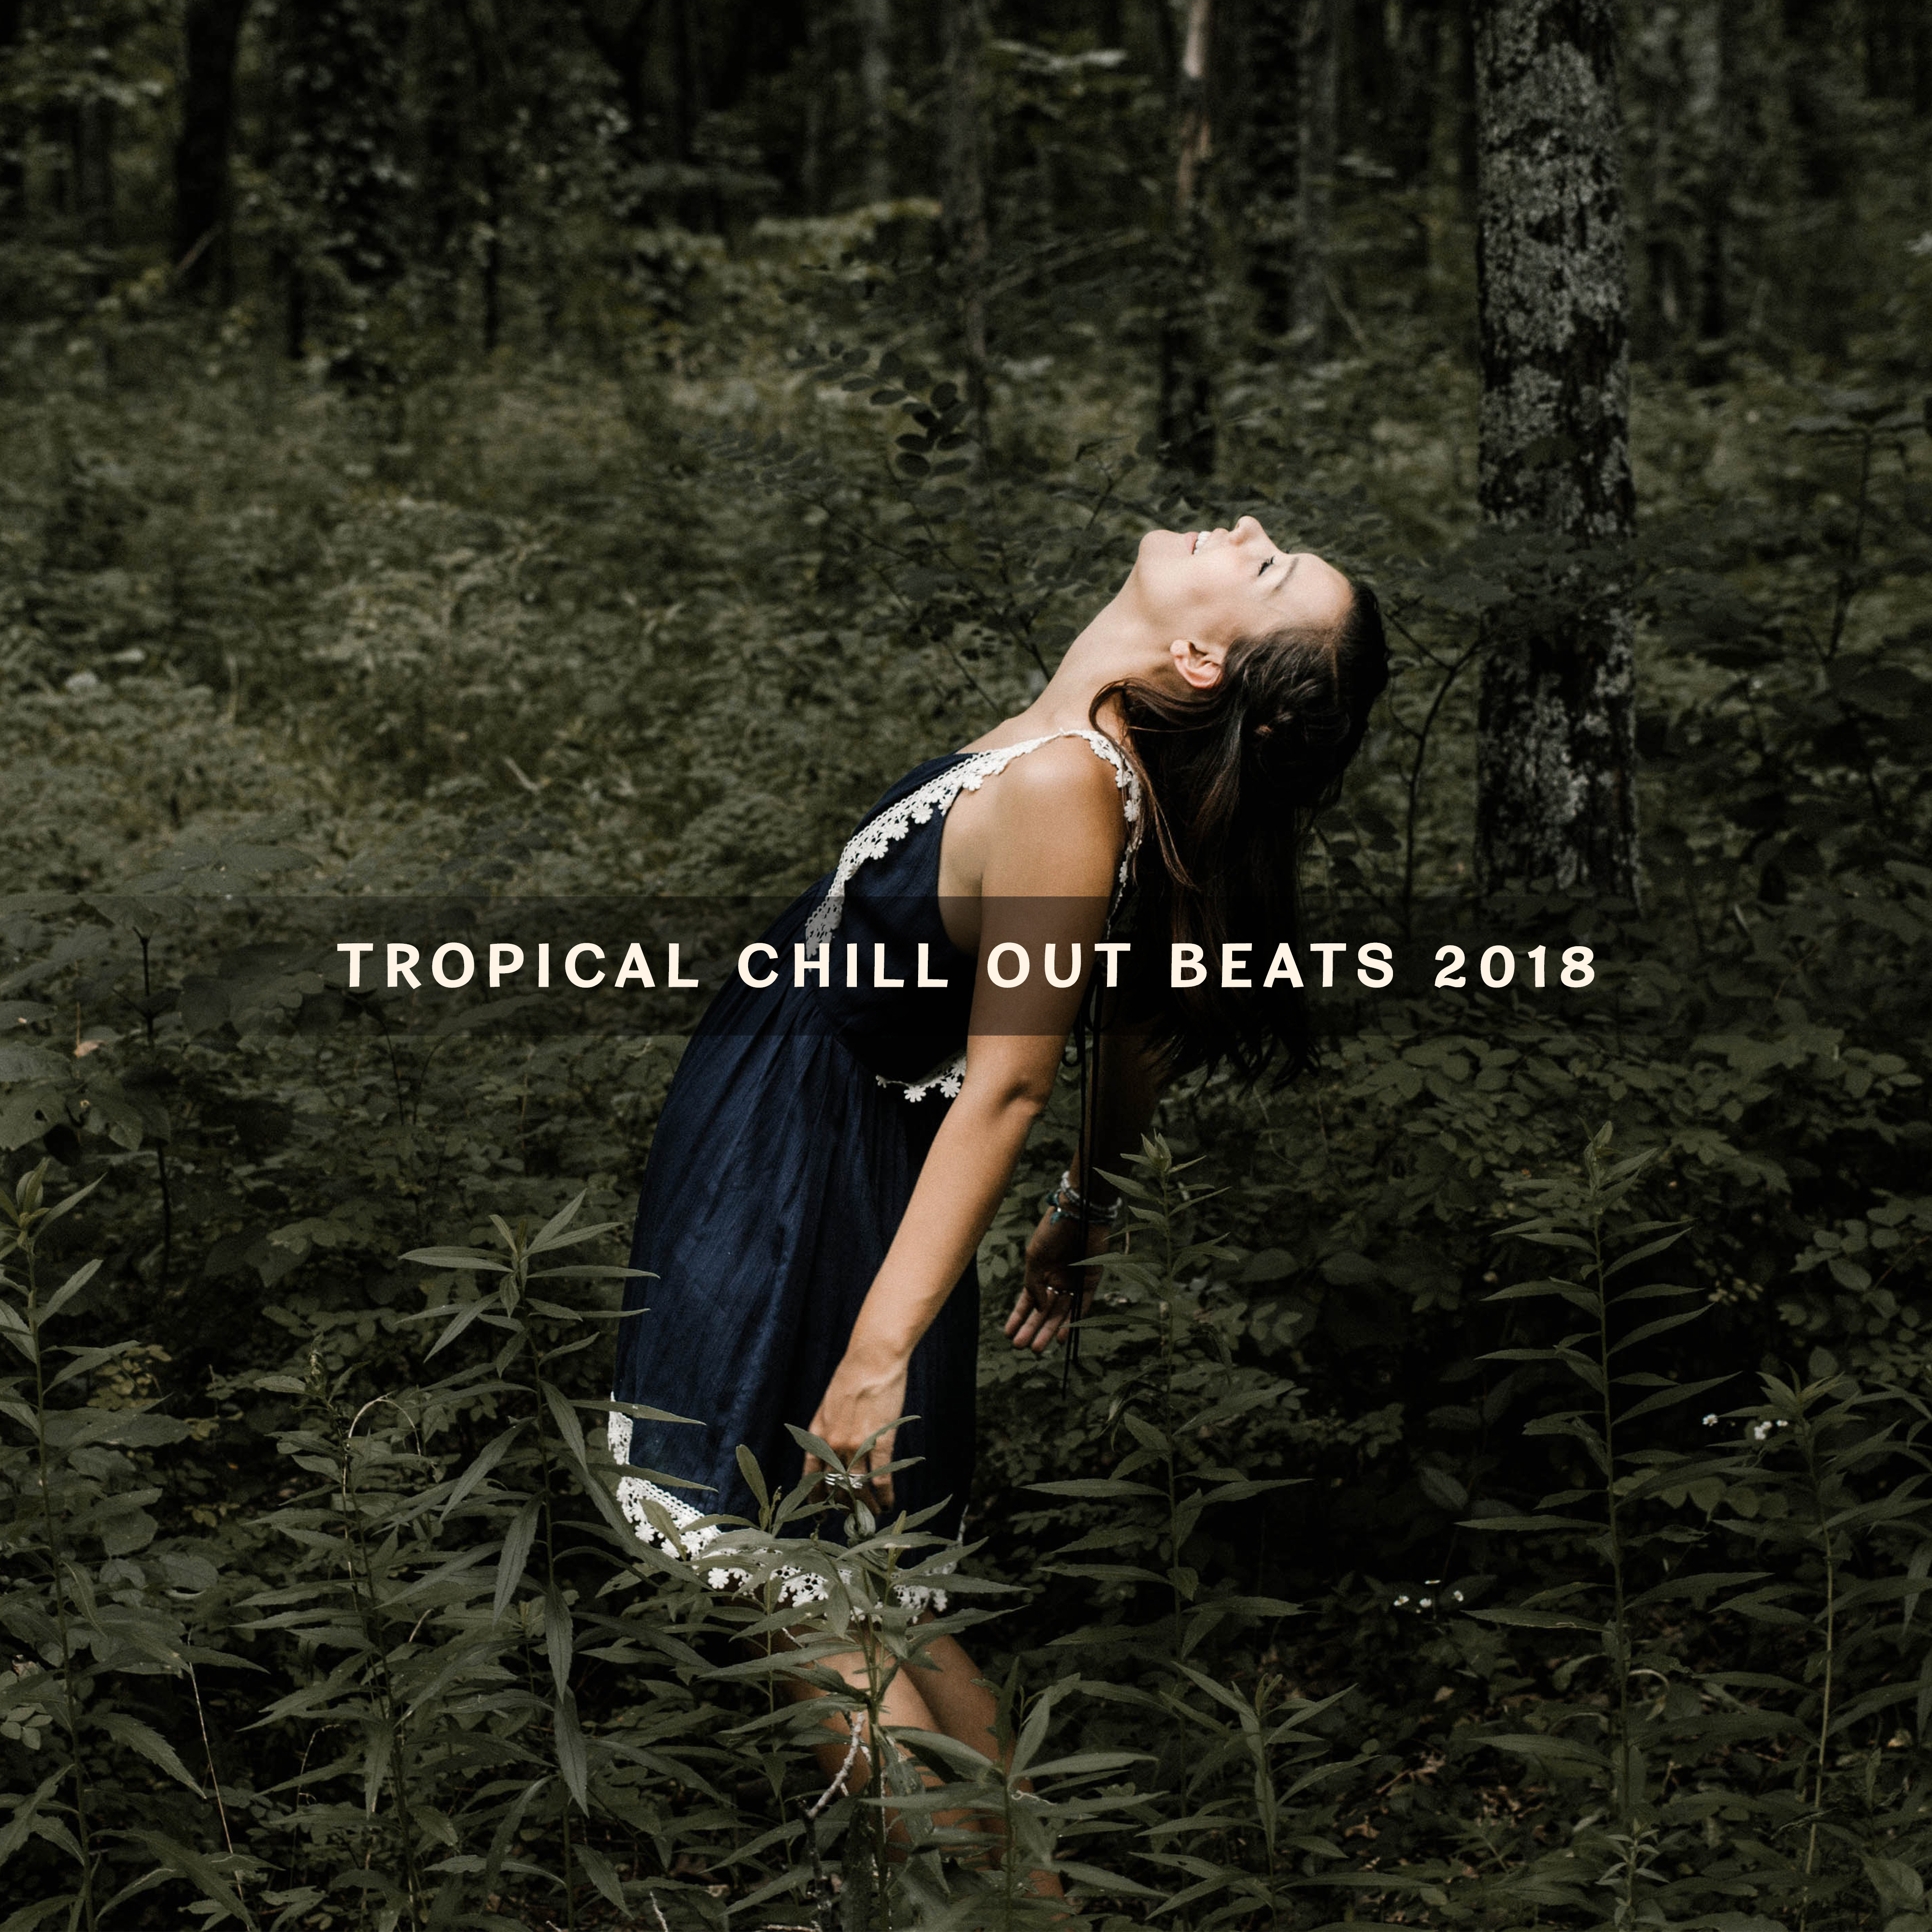 Tropical Chill Out Beats 2018